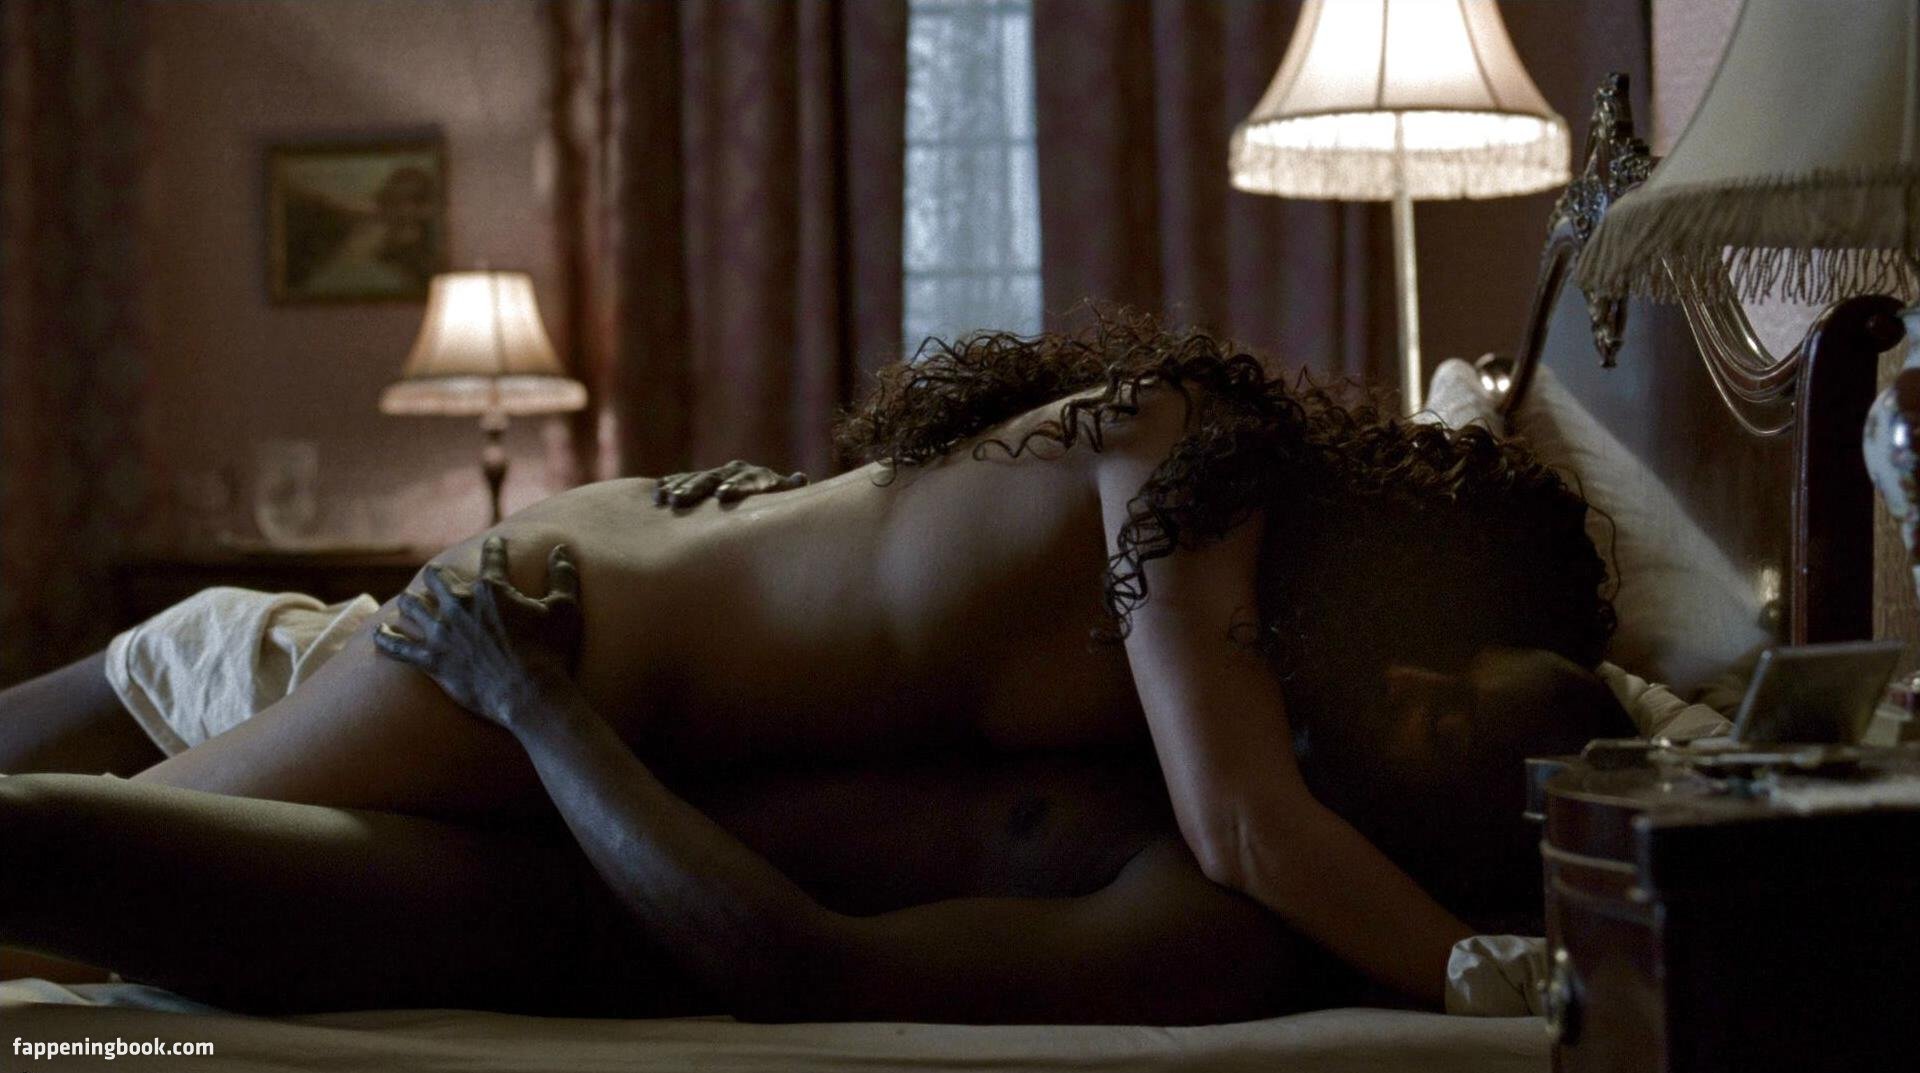 Margot Bingham Nude, The Fappening - Photo #361022 - FappeningBook.